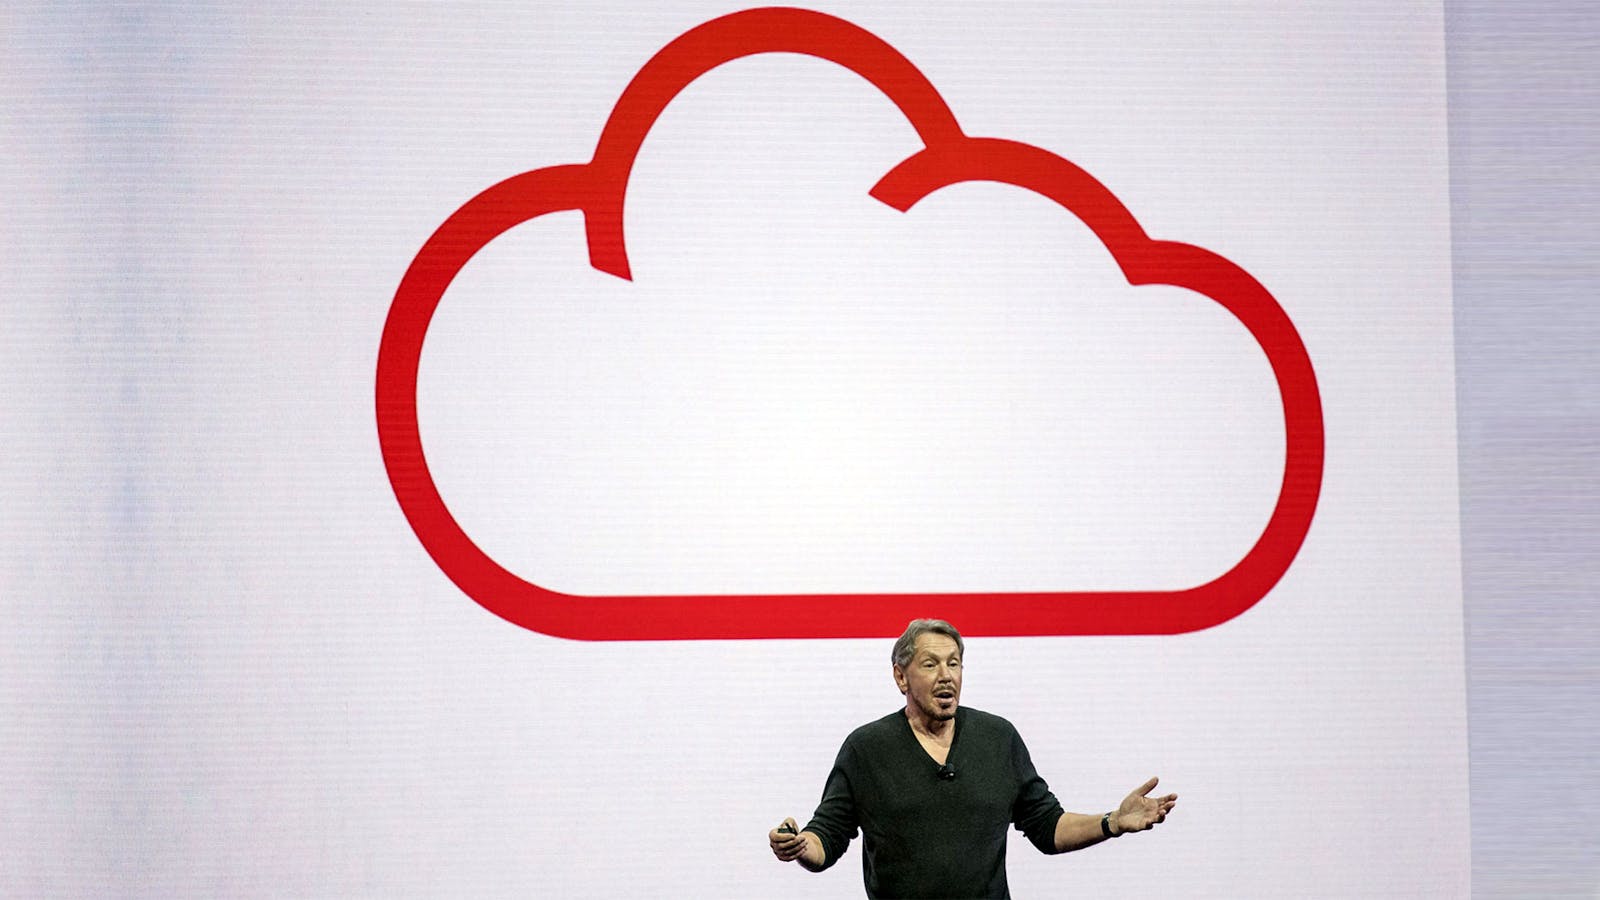 Larry Ellison discussing Oracle Cloud on stage in 2016. Photo by Bloomberg